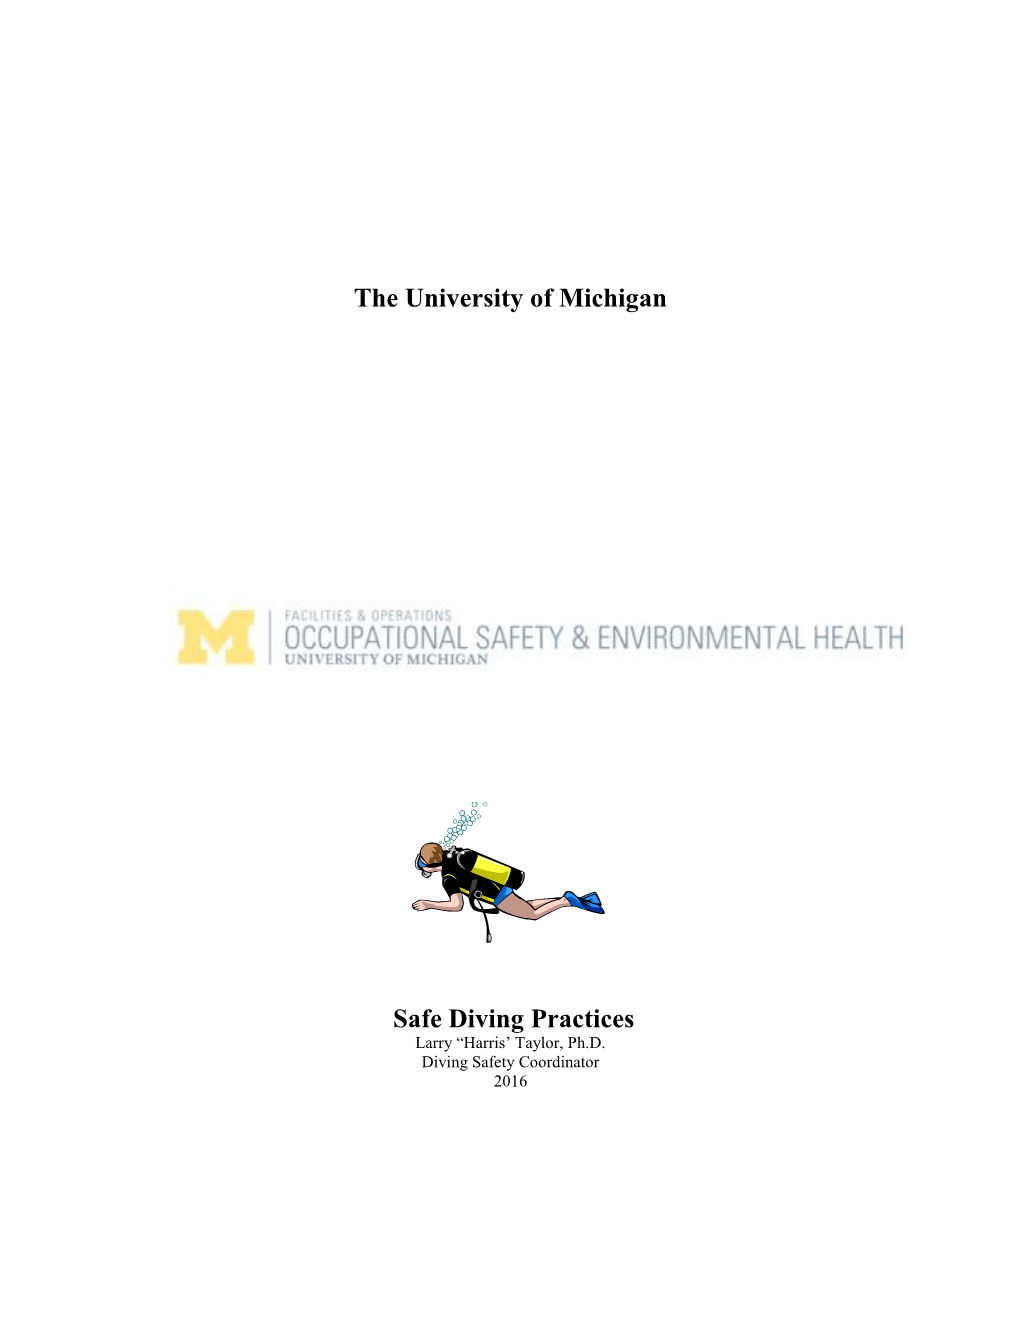 The University of Michigan Safe Diving Practices